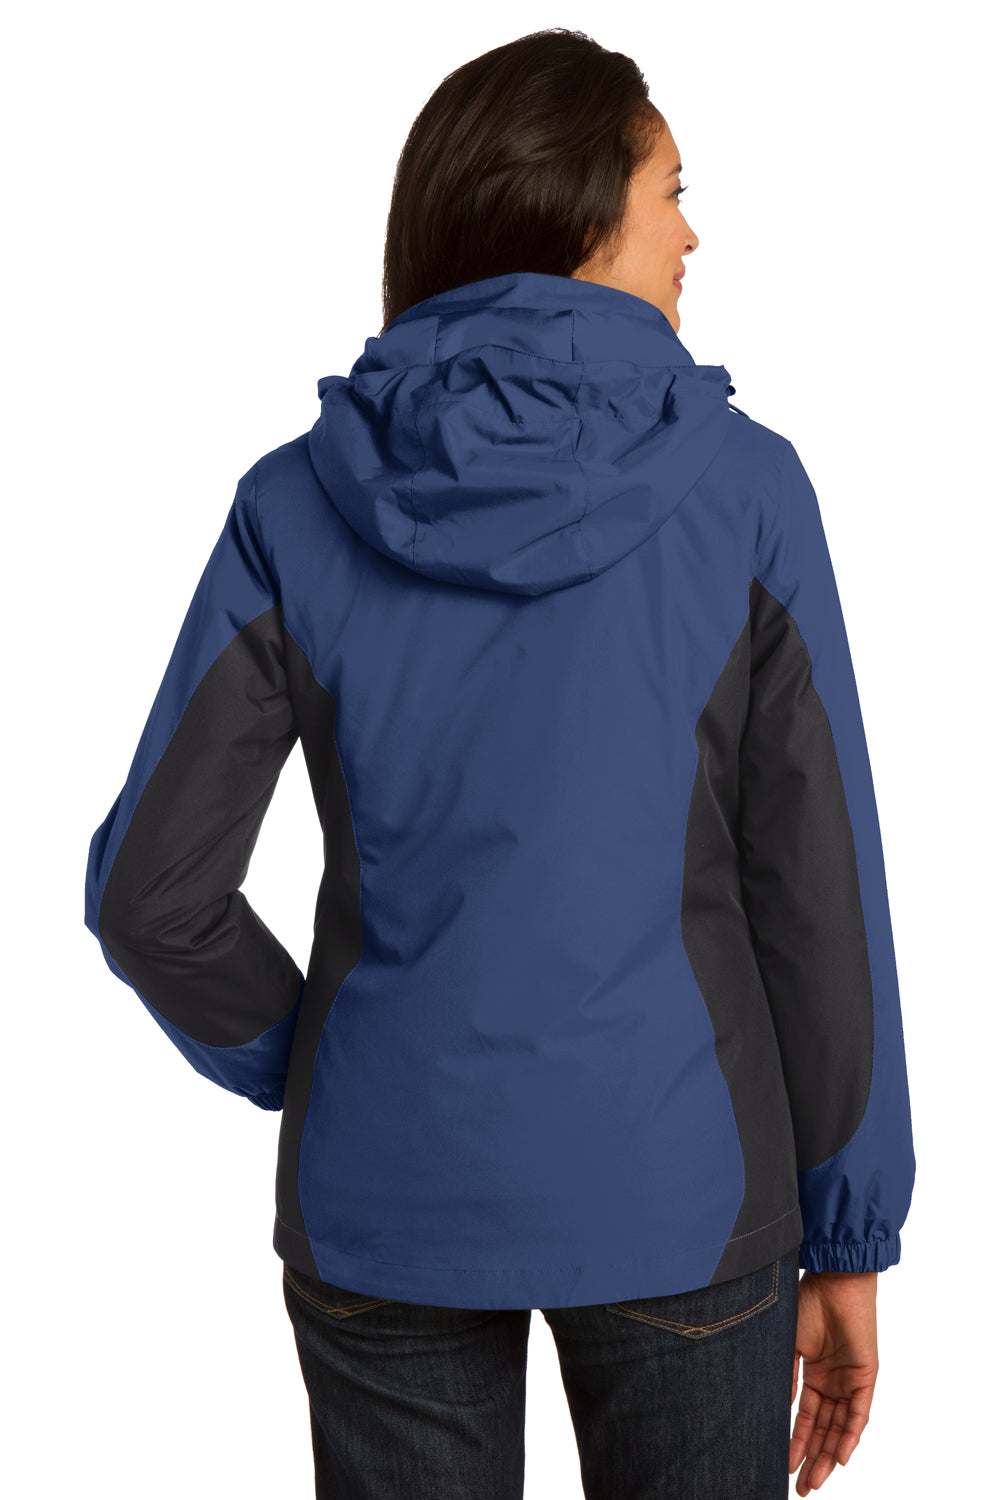 Port Authority L321 Womens 3-in-1 Wind & Water Resistant Full Zip Hooded Jacket Admiral Blue/Black/Grey Back